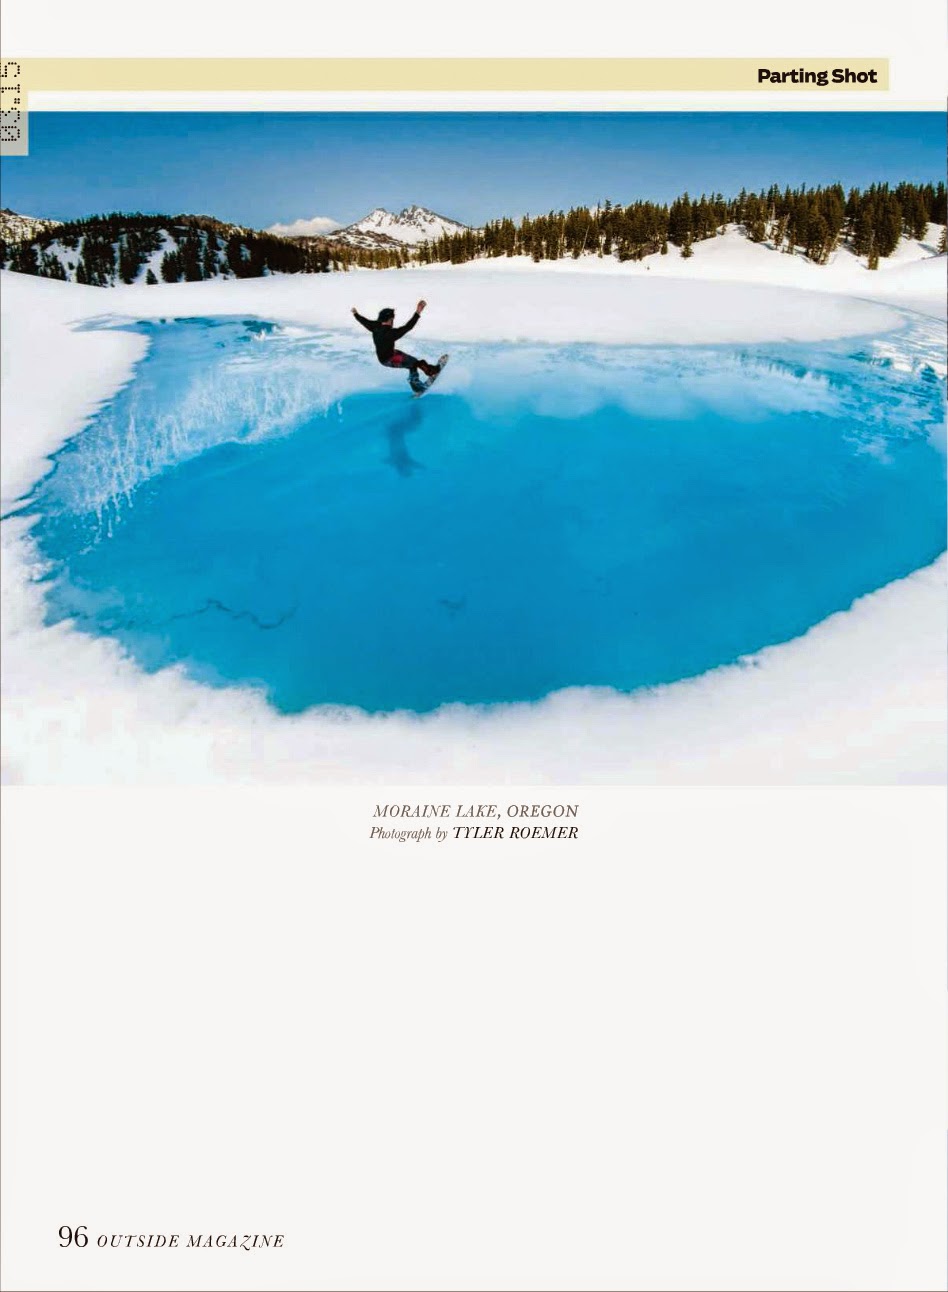 Justin Norman pond skims on his snowboard in the backcountry of Oregon. 